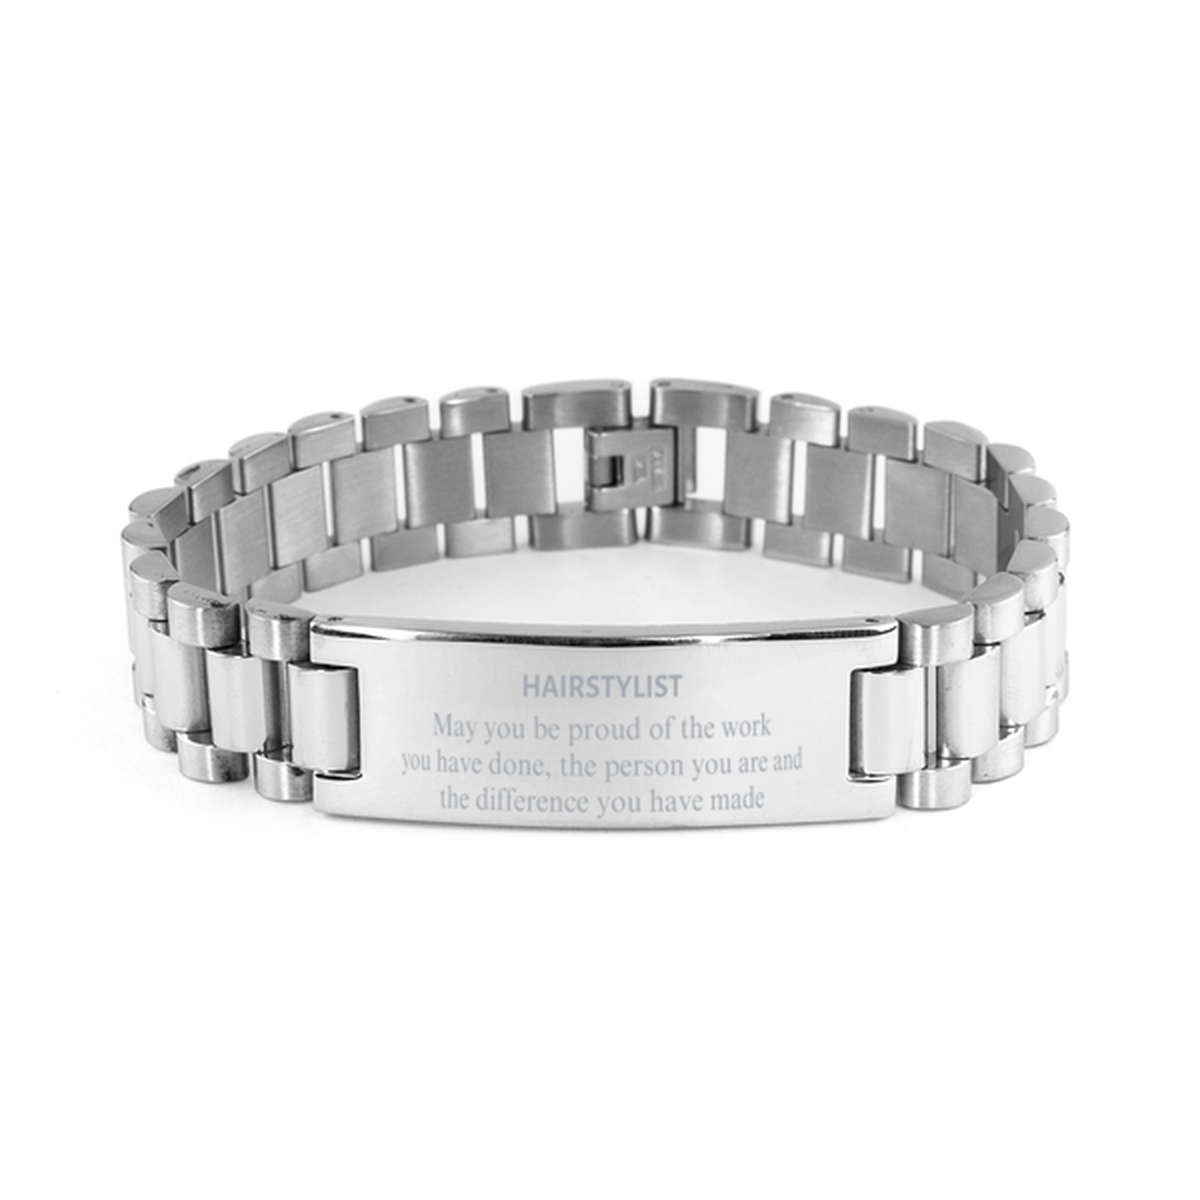 Hairstylist May you be proud of the work you have done, Retirement Hairstylist Ladder Stainless Steel Bracelet for Colleague Appreciation Gifts Amazing for Hairstylist